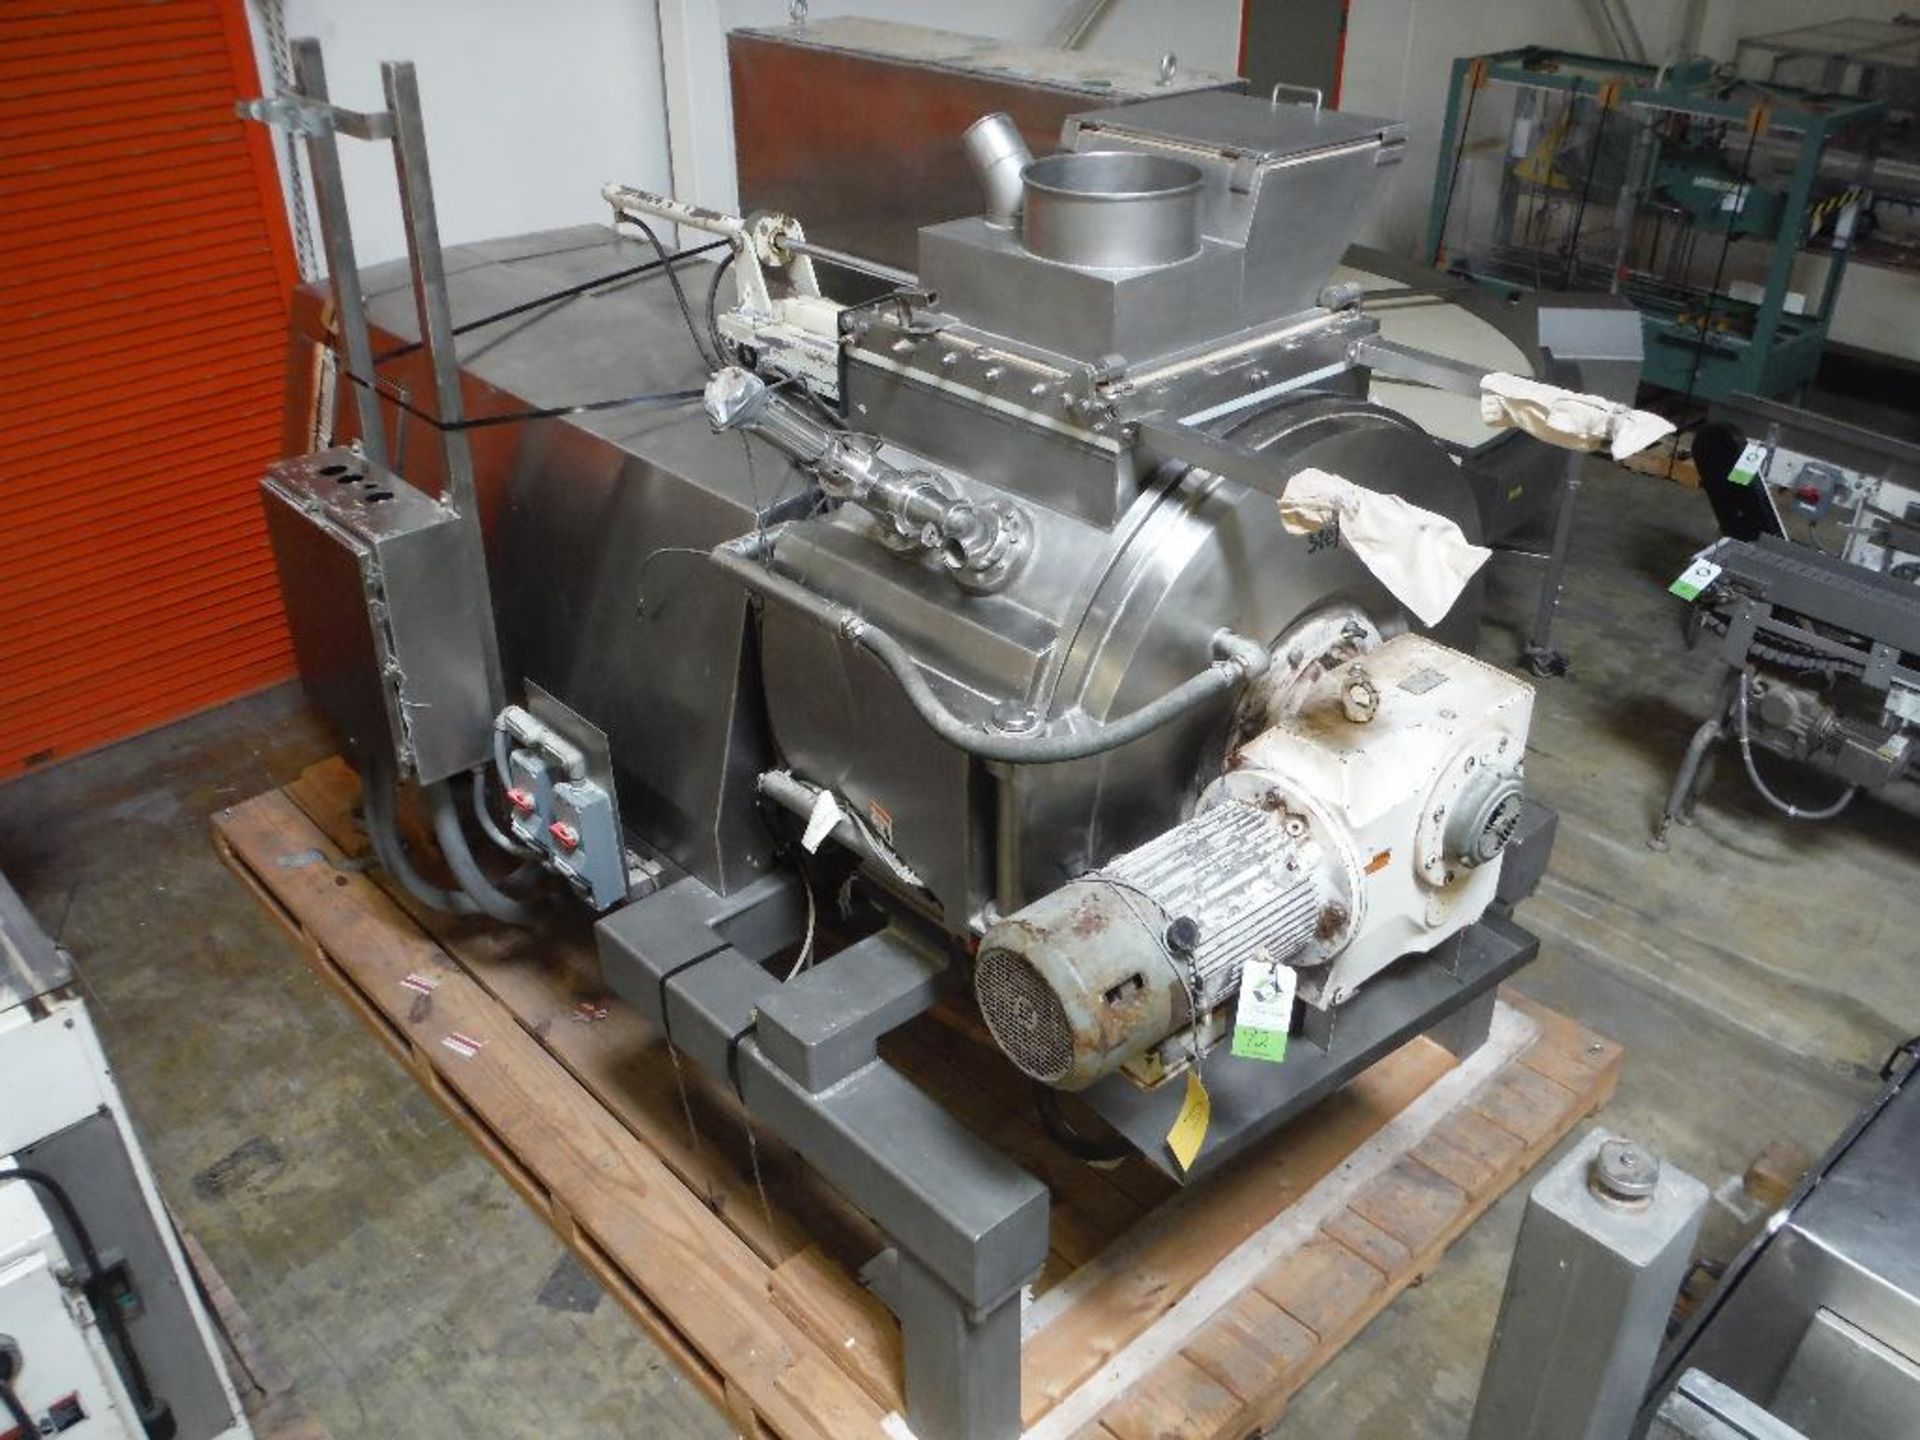 Stephan high speed jacketed mixer, Model TK_600, SN 714583, 43 in. bowl diameter x 26 in. deep, with